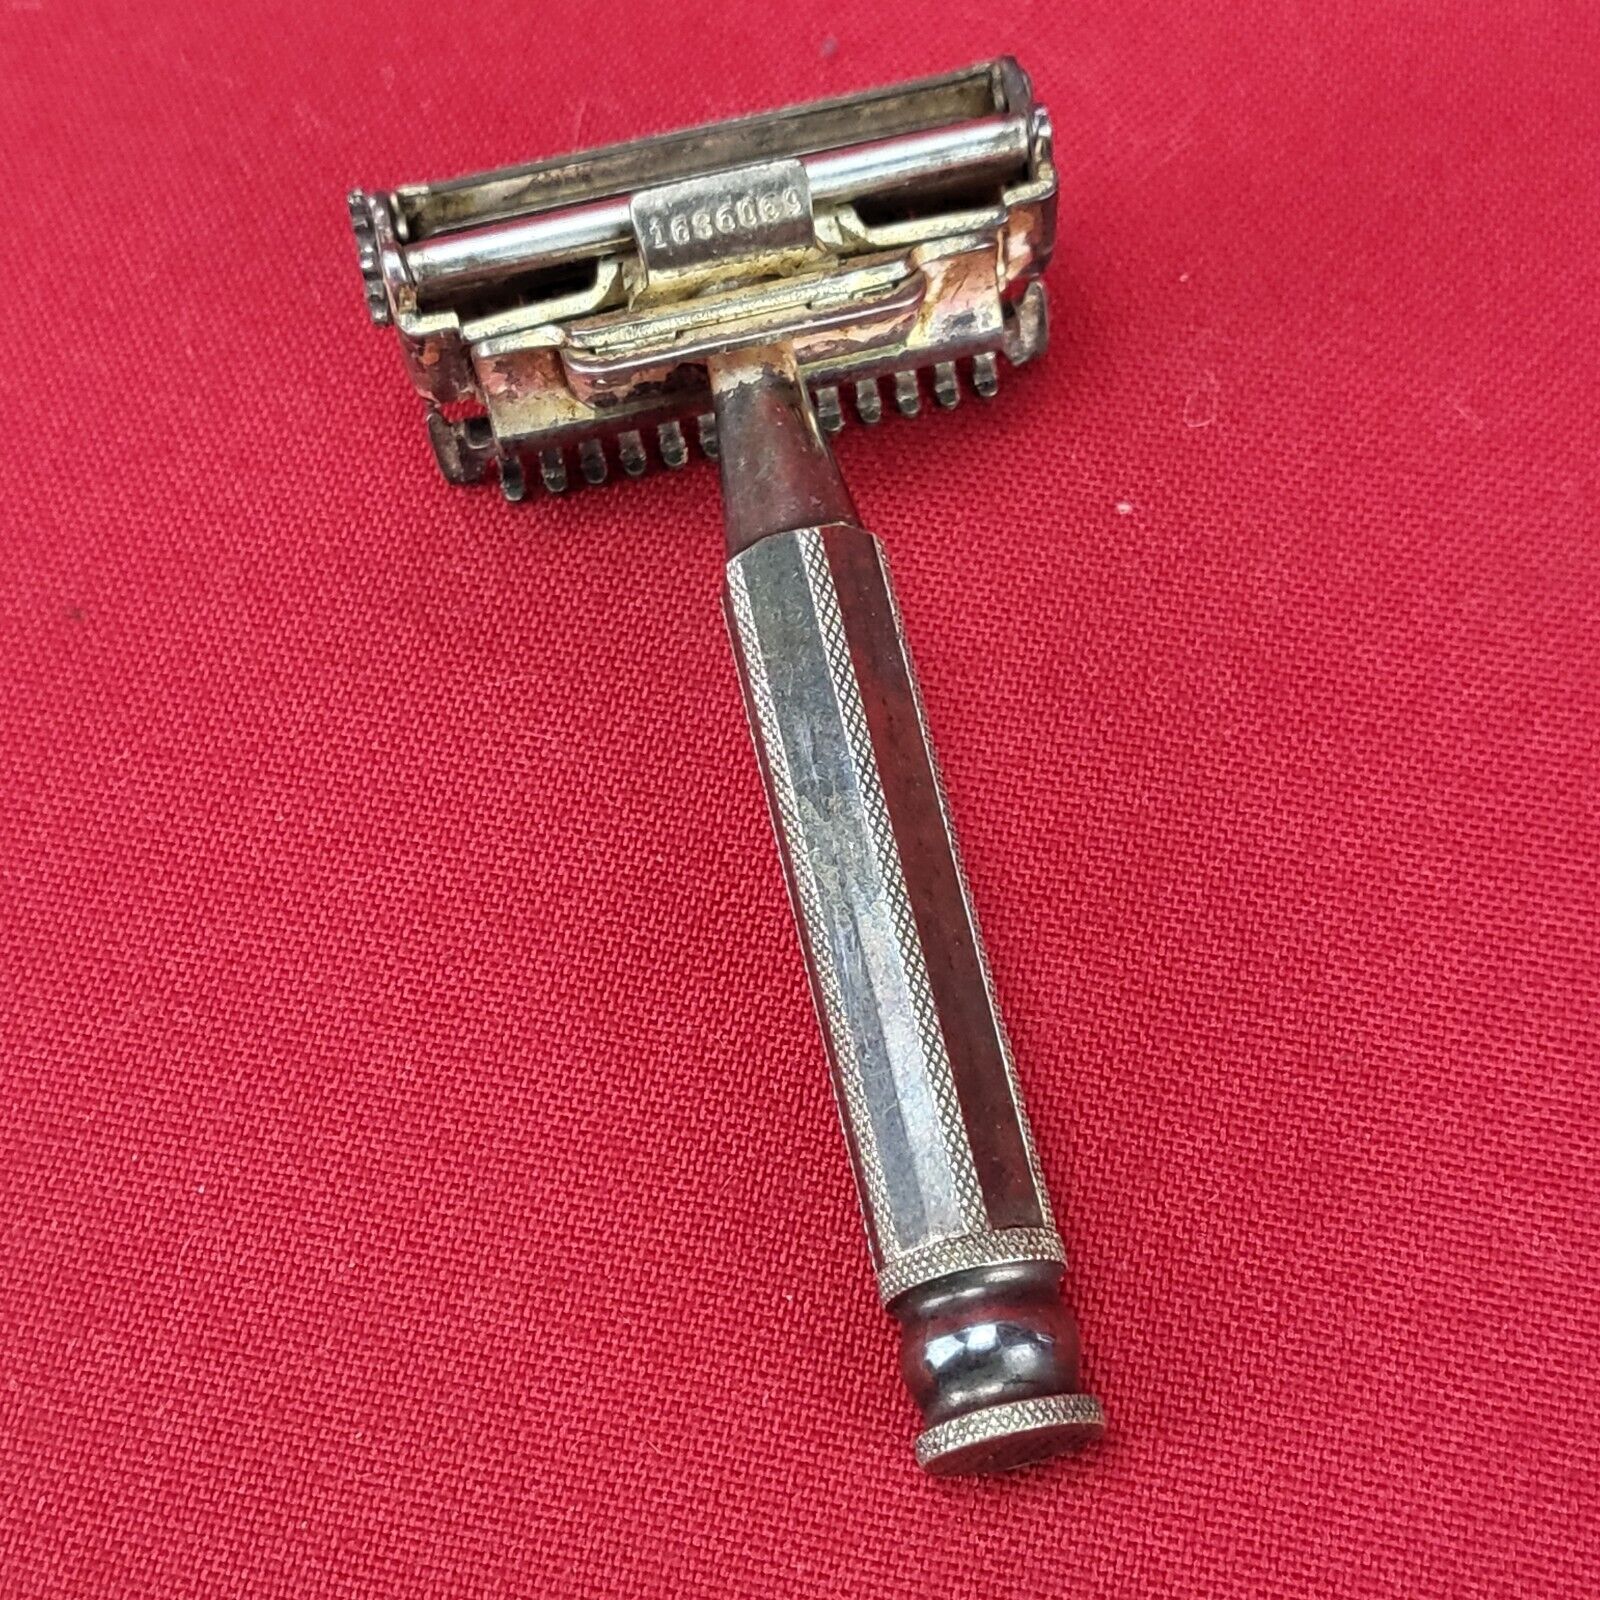 Vintage VALET AutoStrop VB2 DeLuxe SILVER Plated Single Edge Safety Razor